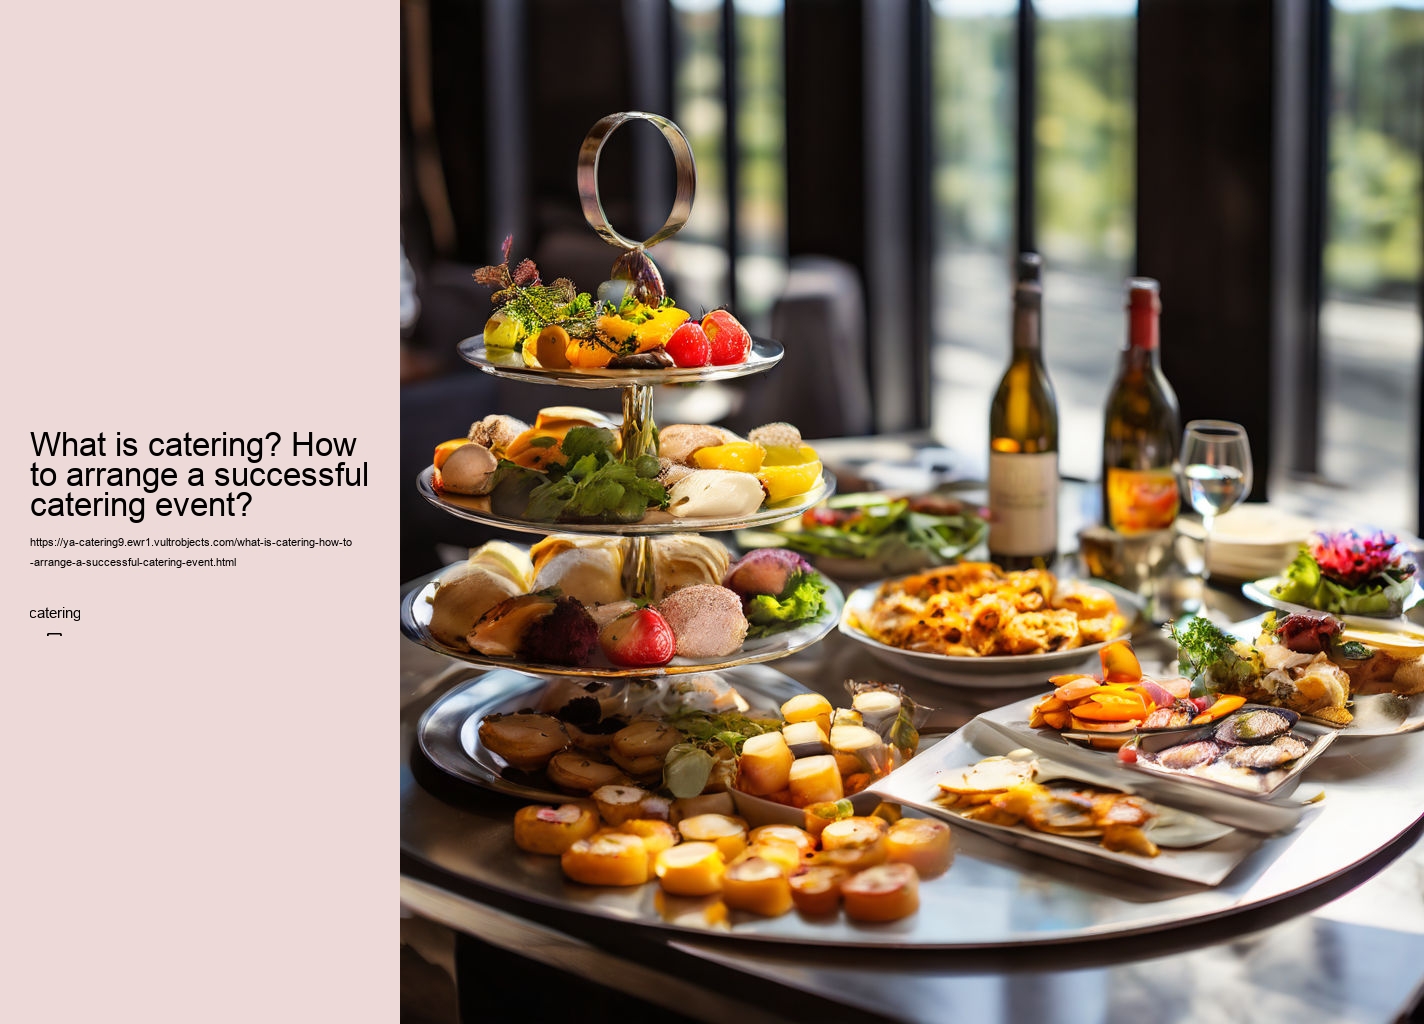 What is catering? How to arrange a successful catering event?